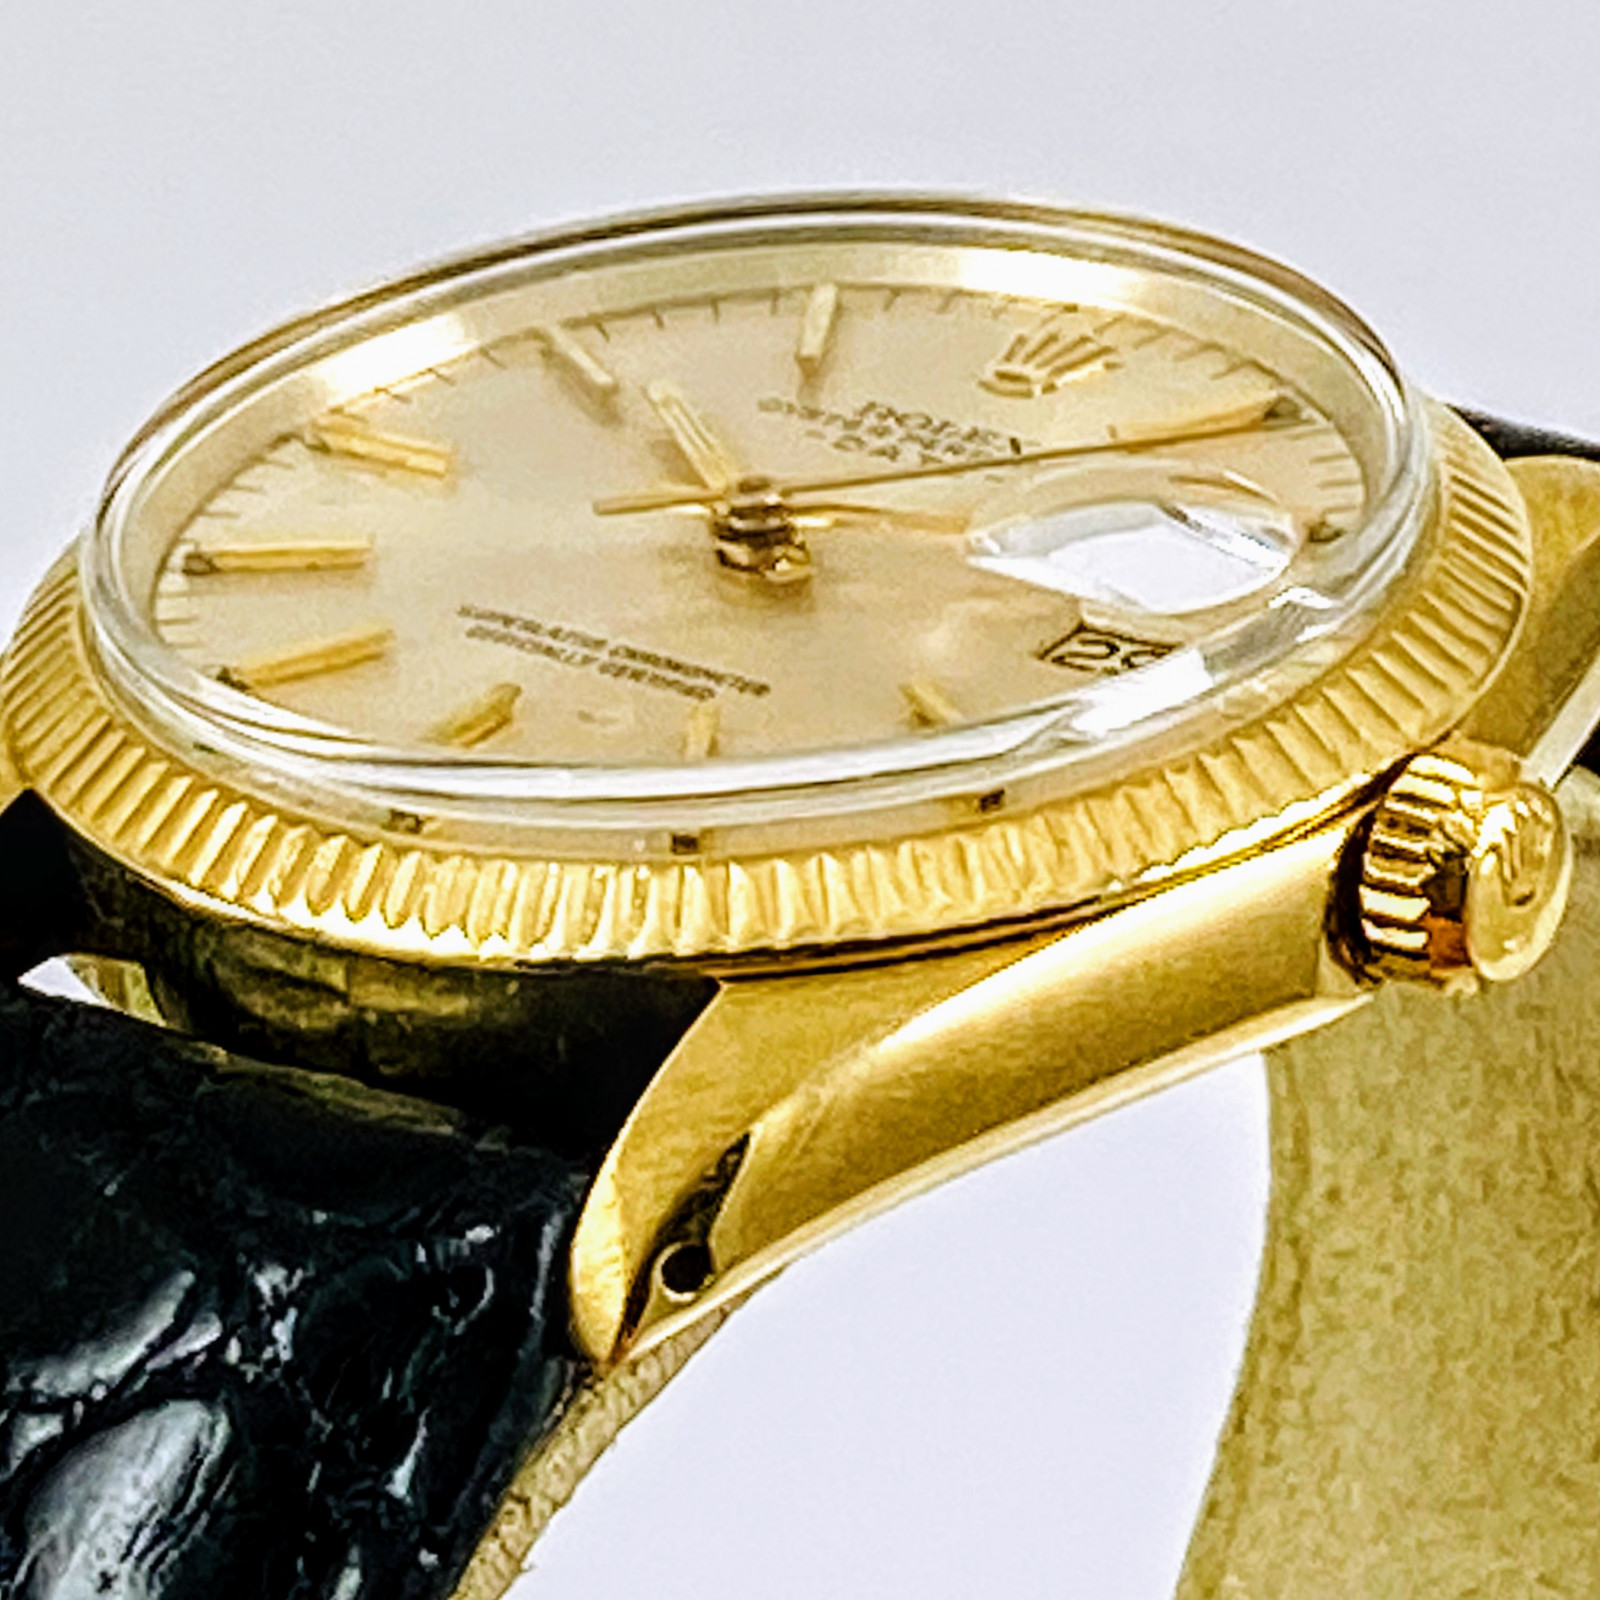 Rolex 1503 Date 14KT Solid Gold